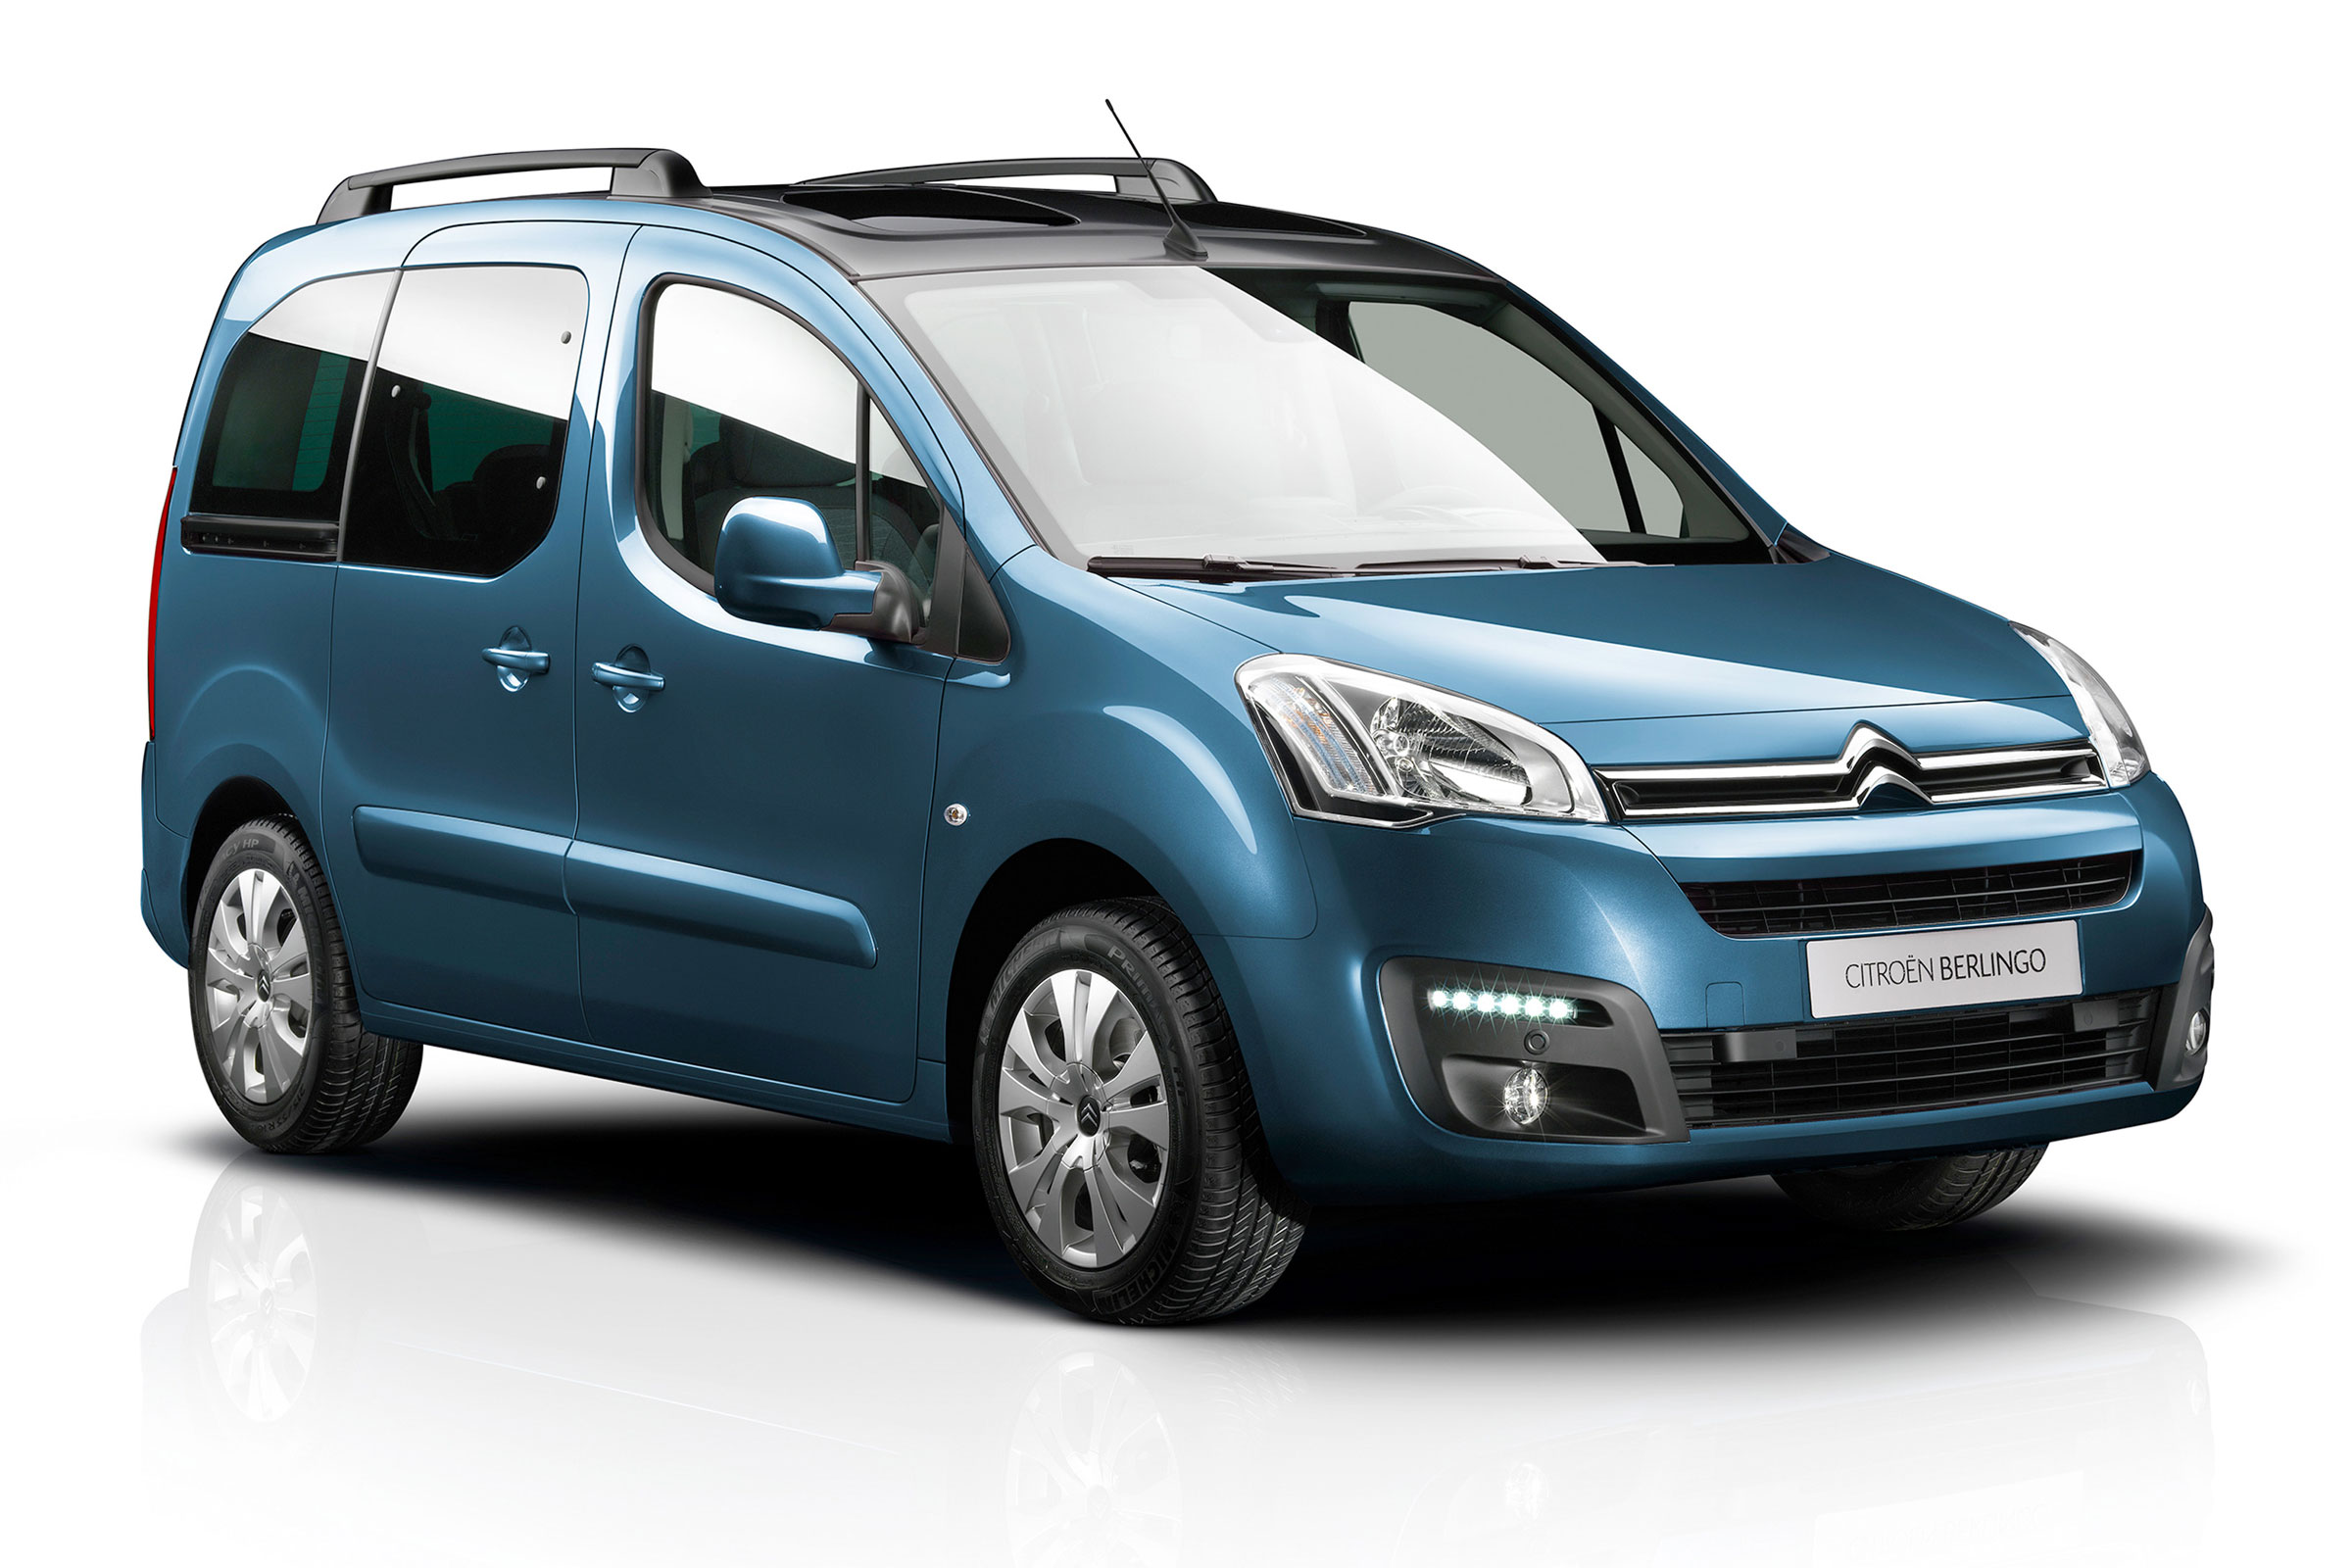 Citroen Berlingo 2015 upgraded tech and improved space